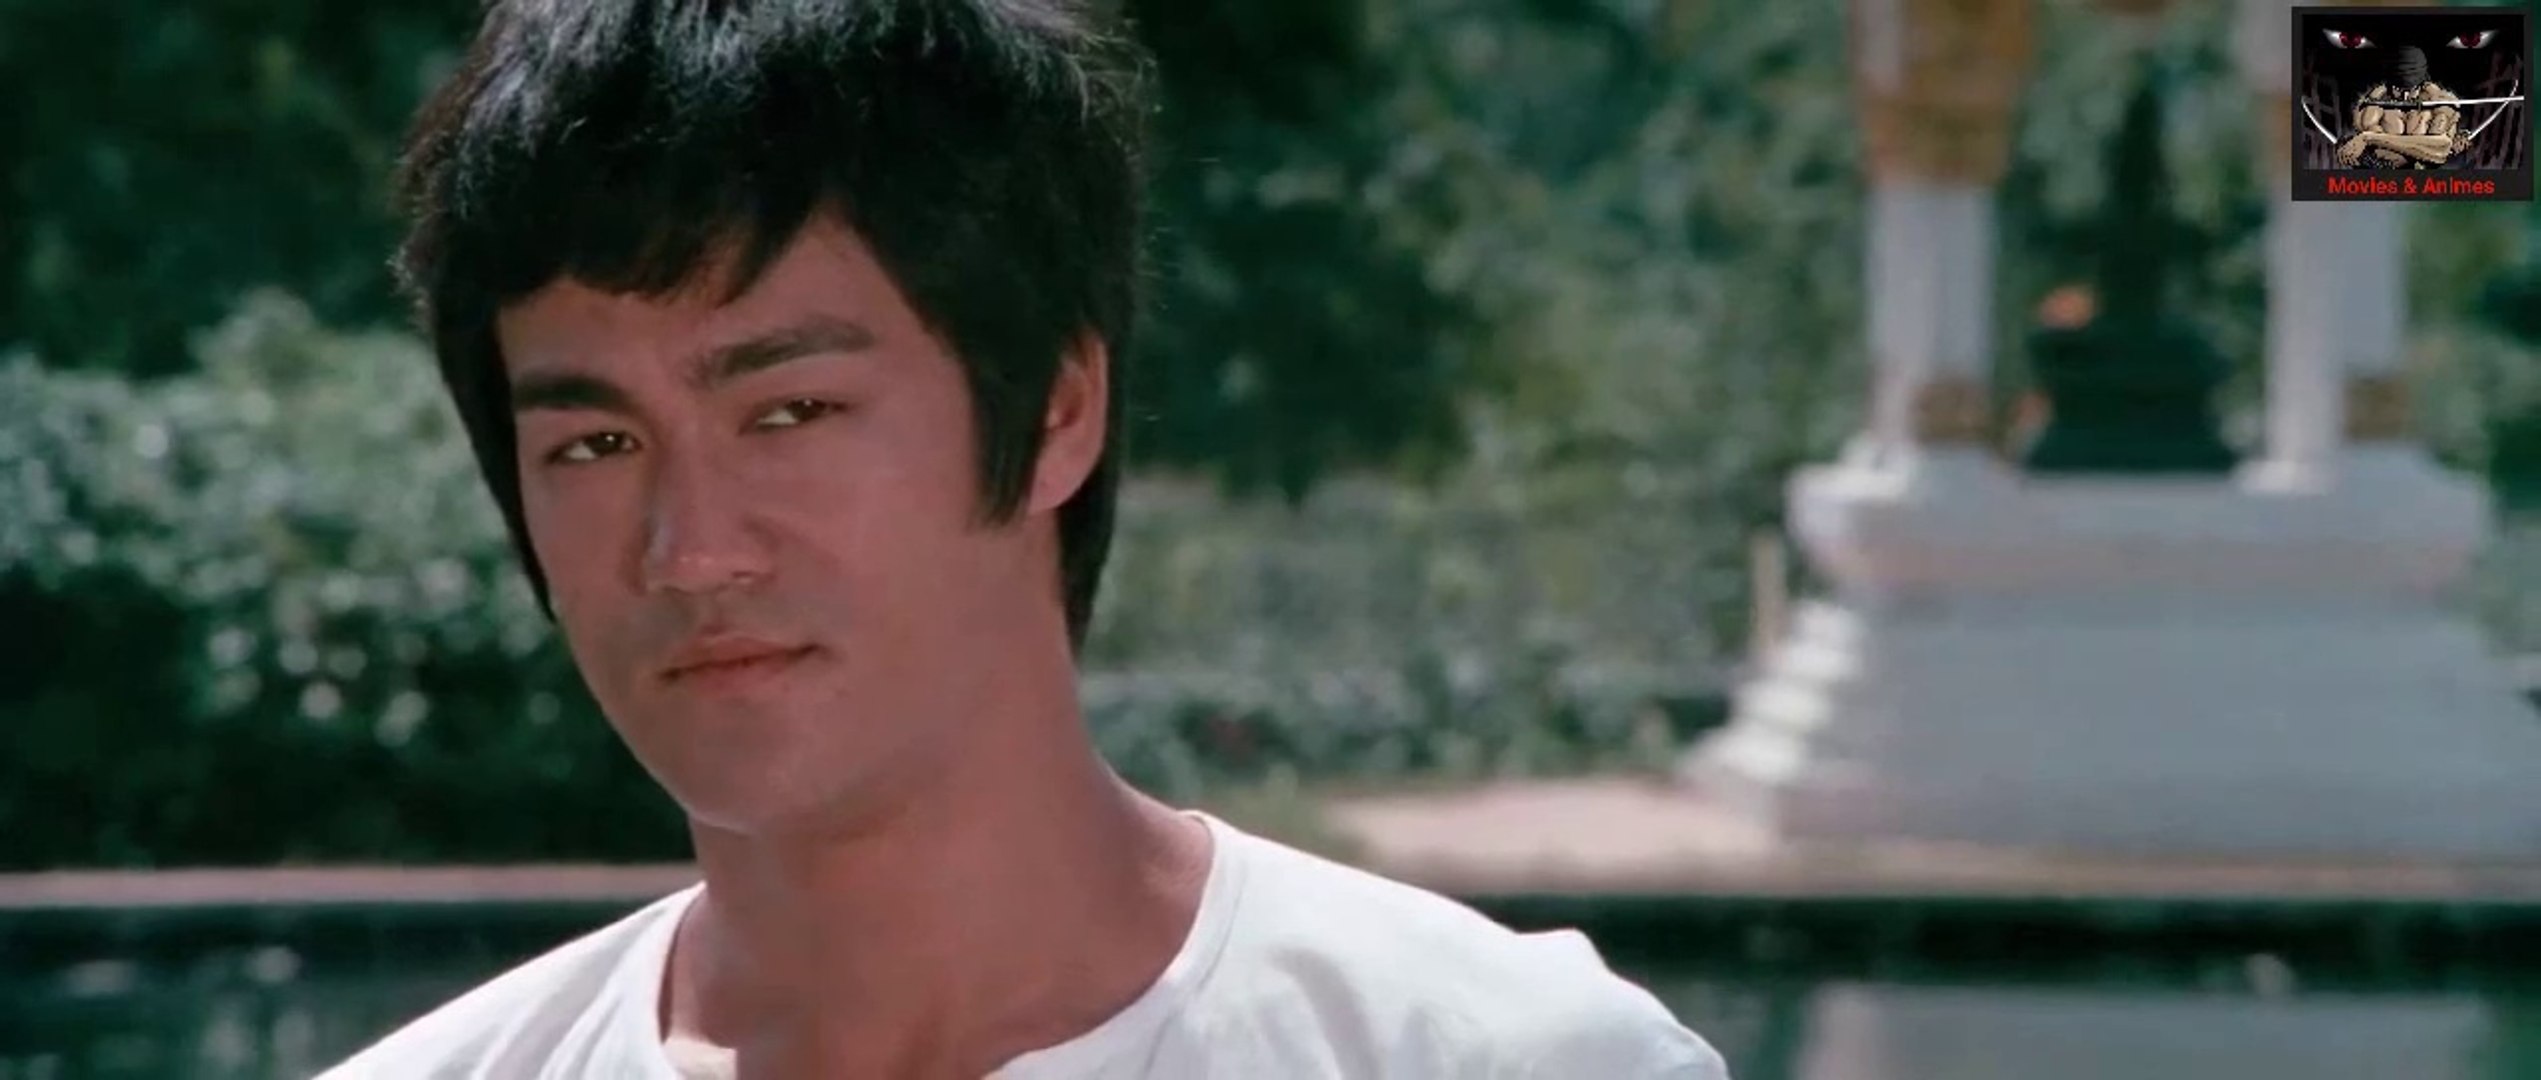 Bruce Lee The Big Boss 1971 Movie English Subtitle Part 2 of 2 - فيديو  Dailymotion